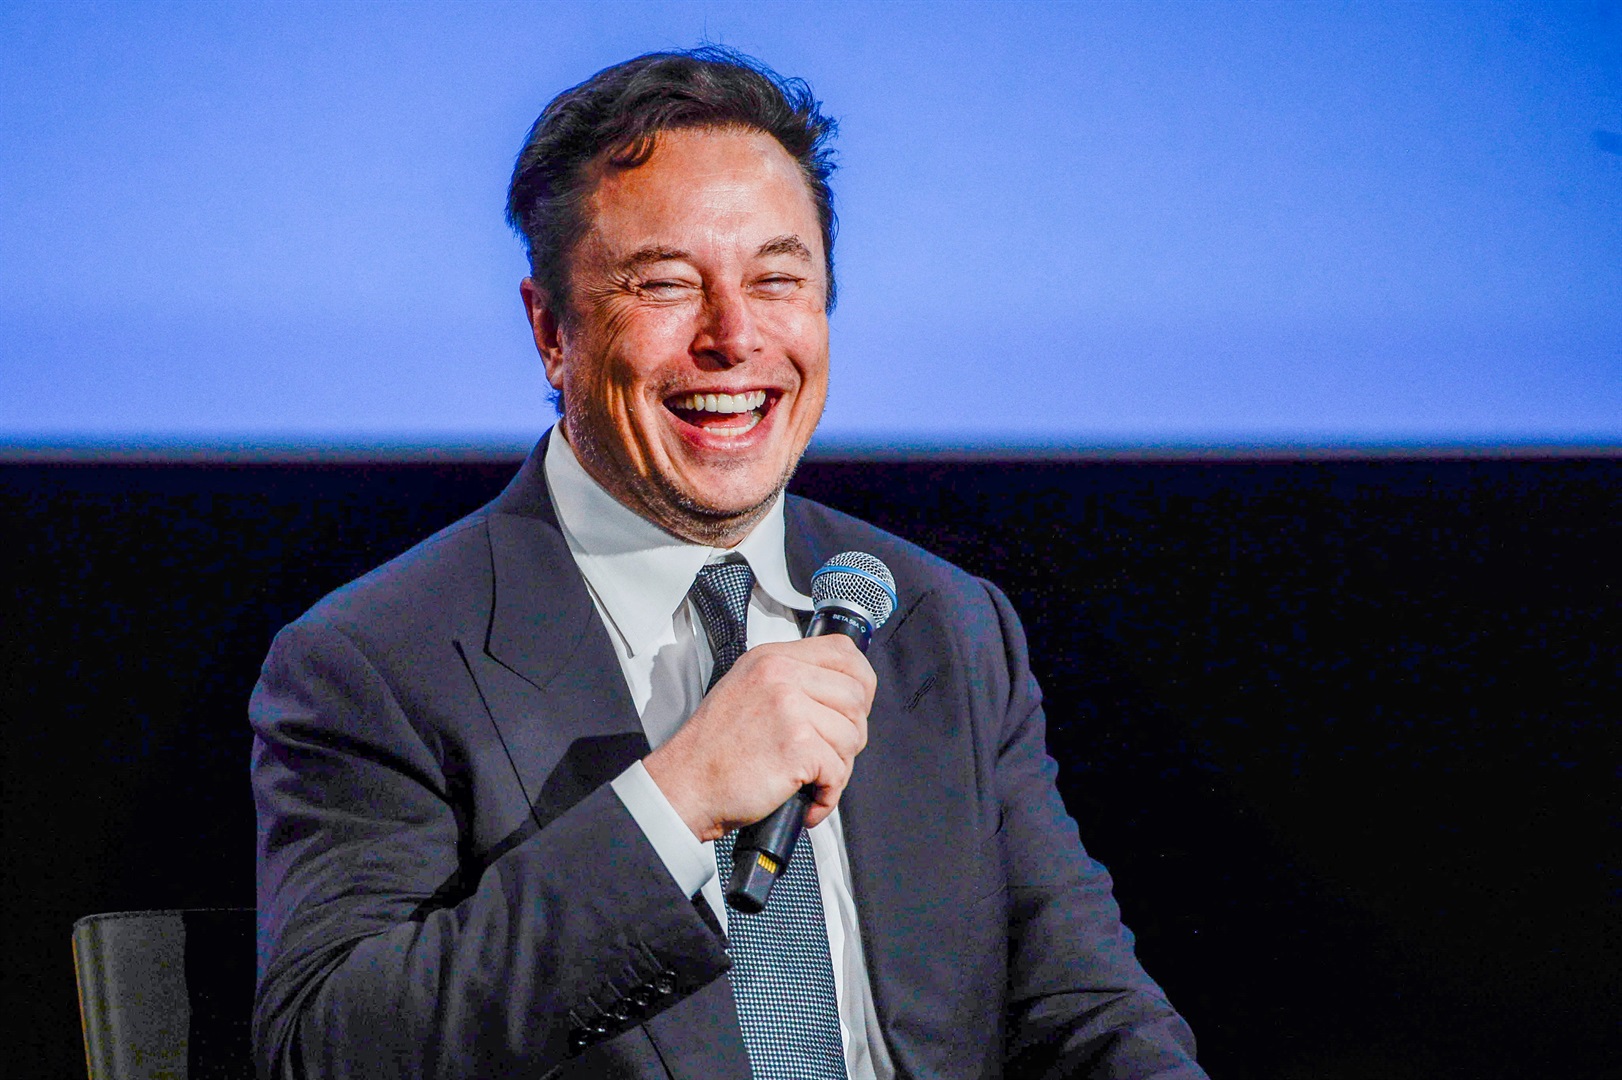 Businessinsider.co.za | Elon Musk says it's easy for him to get investment support because he has an 'extremely good' track record